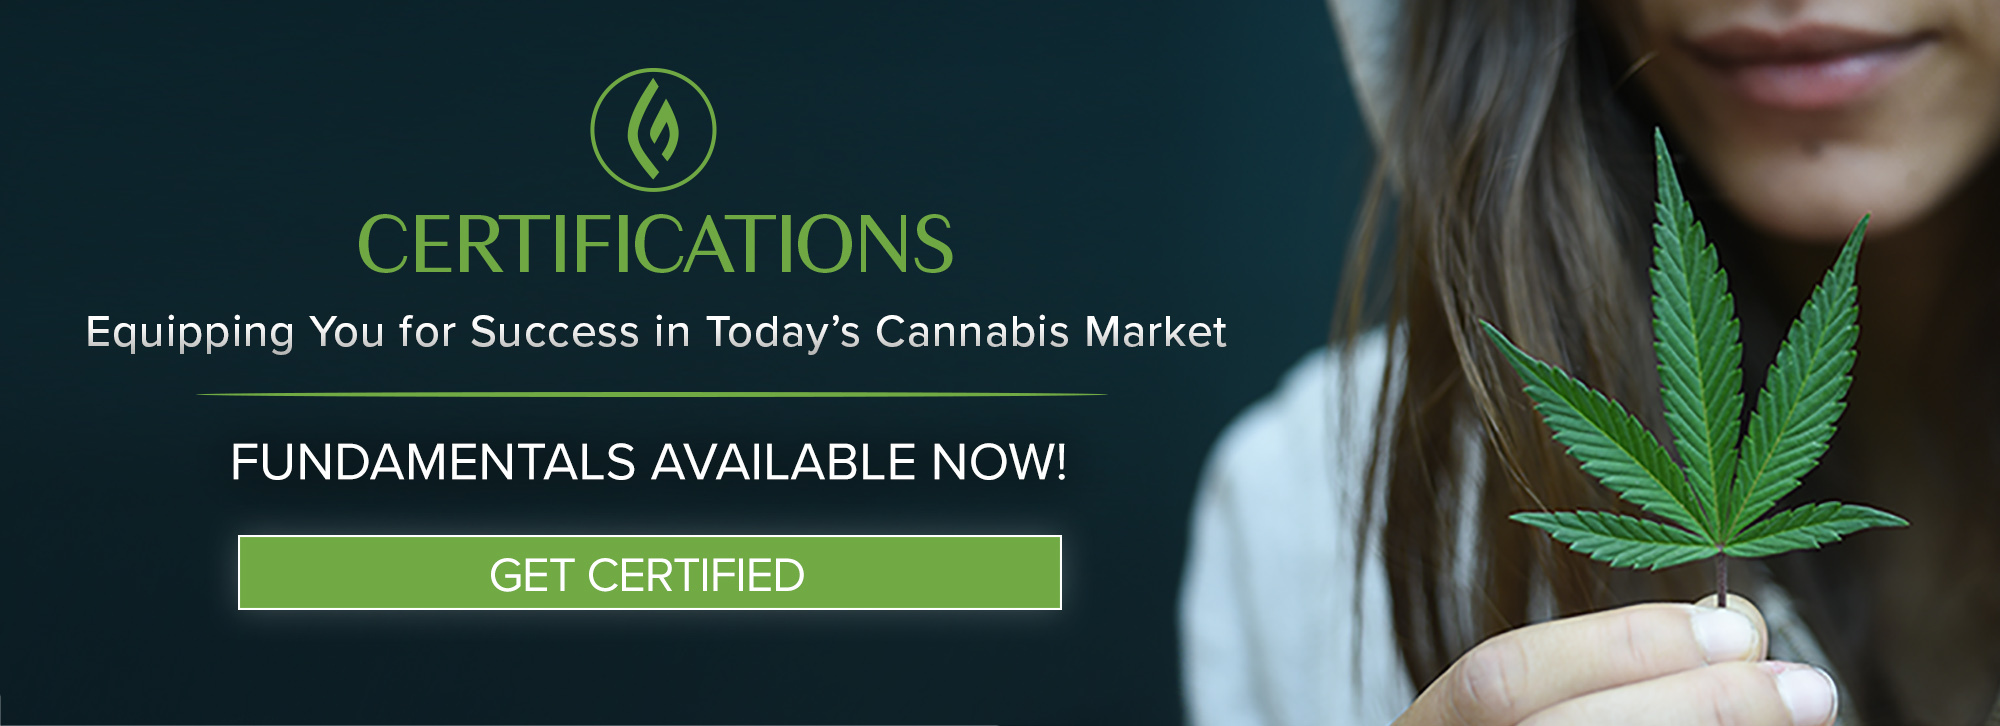 Green Flower Launches Its Official Cannabis Certification Program | Business Wire